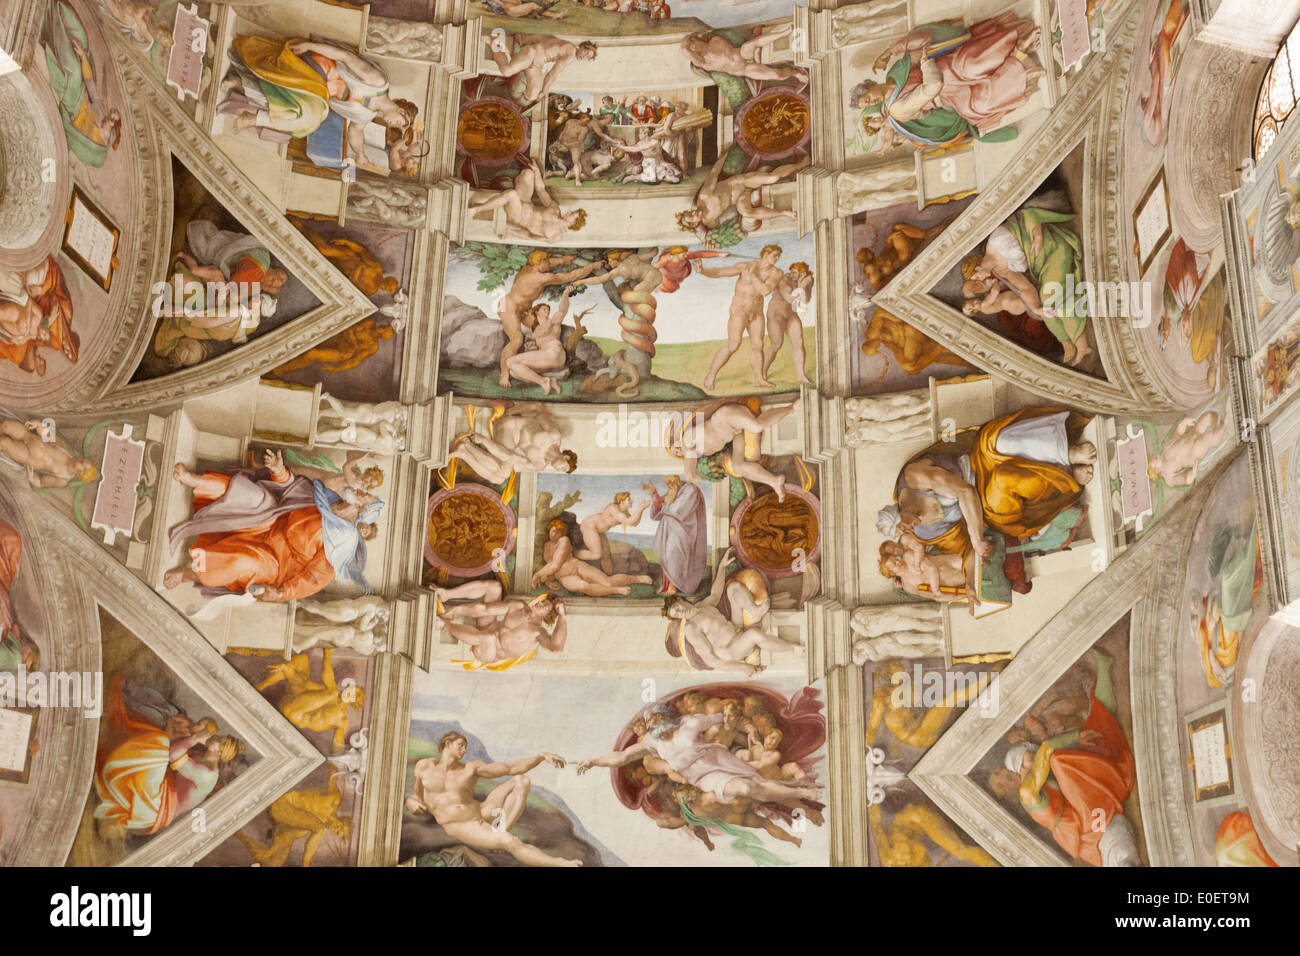 The ceiling or roof of the Sistine Chapel paintings, painted by Michelangelo, Vatican City, Rome Italy Stock Photo